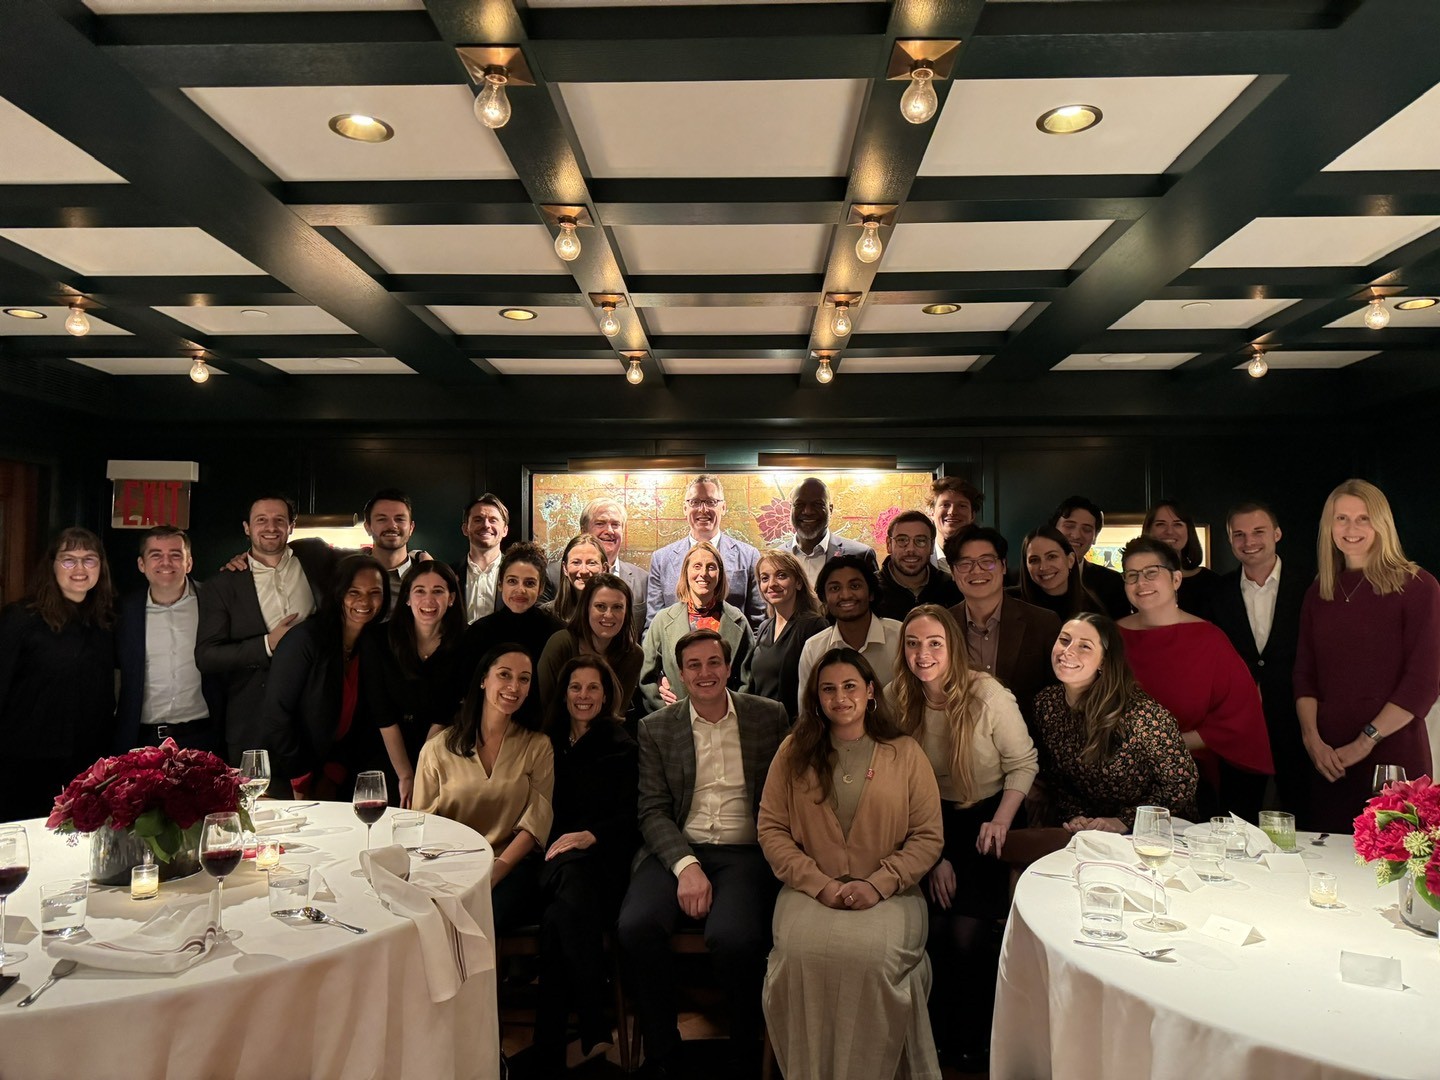 The entire O.W. team at its annual holiday dinner, hosted by O.W. founder Pete Stavros and his wife Lindsay Stavros.